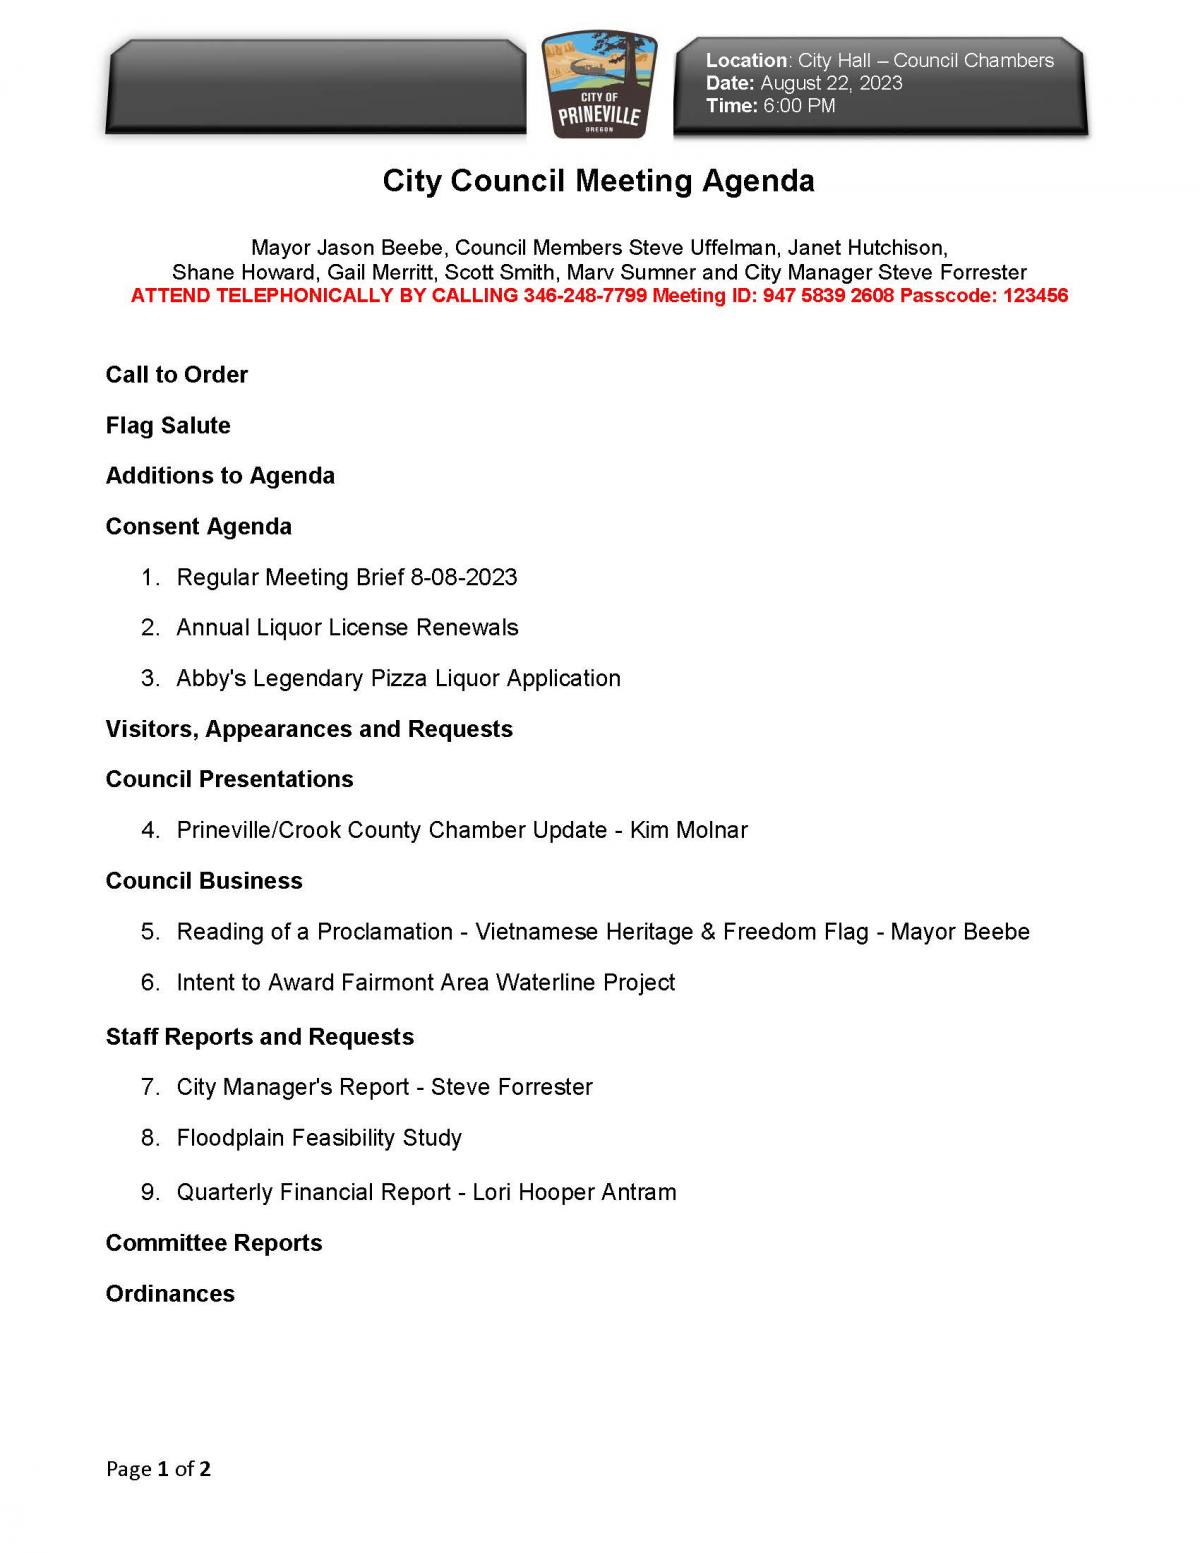 Council Agenda - Page 1 of 2